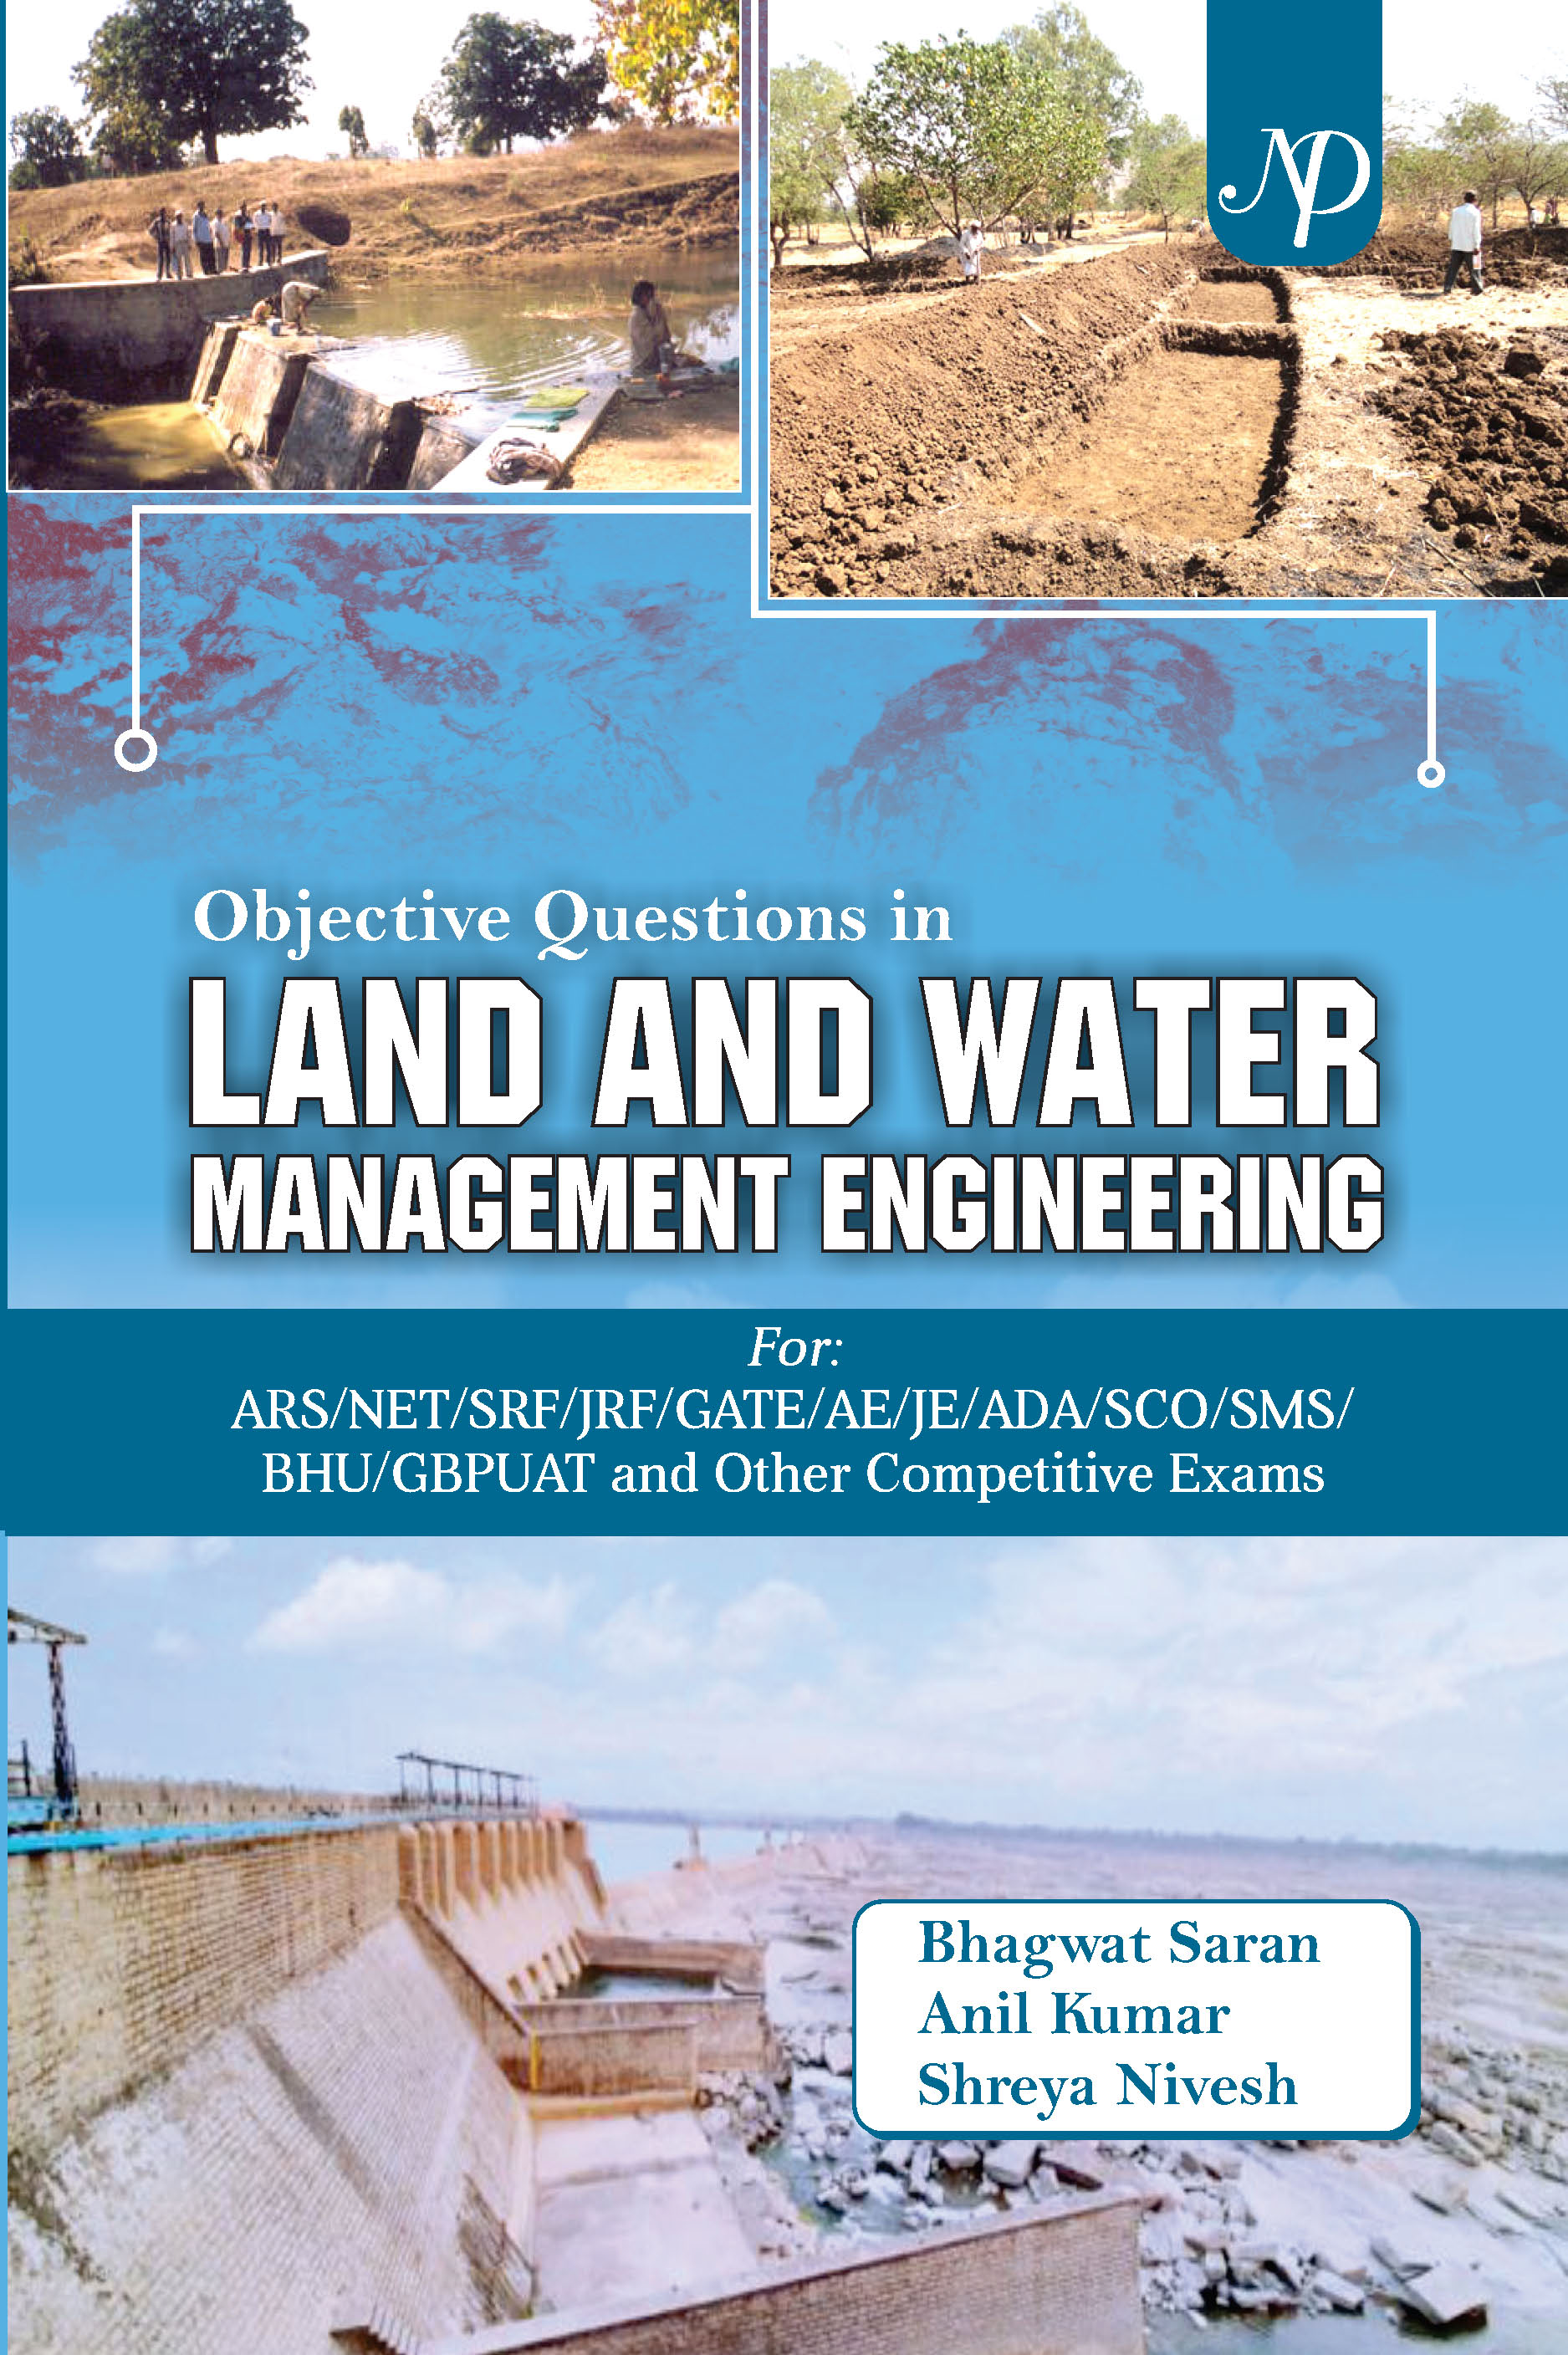 Objective Questions in Land and Water Management Engineering Cover.jpg